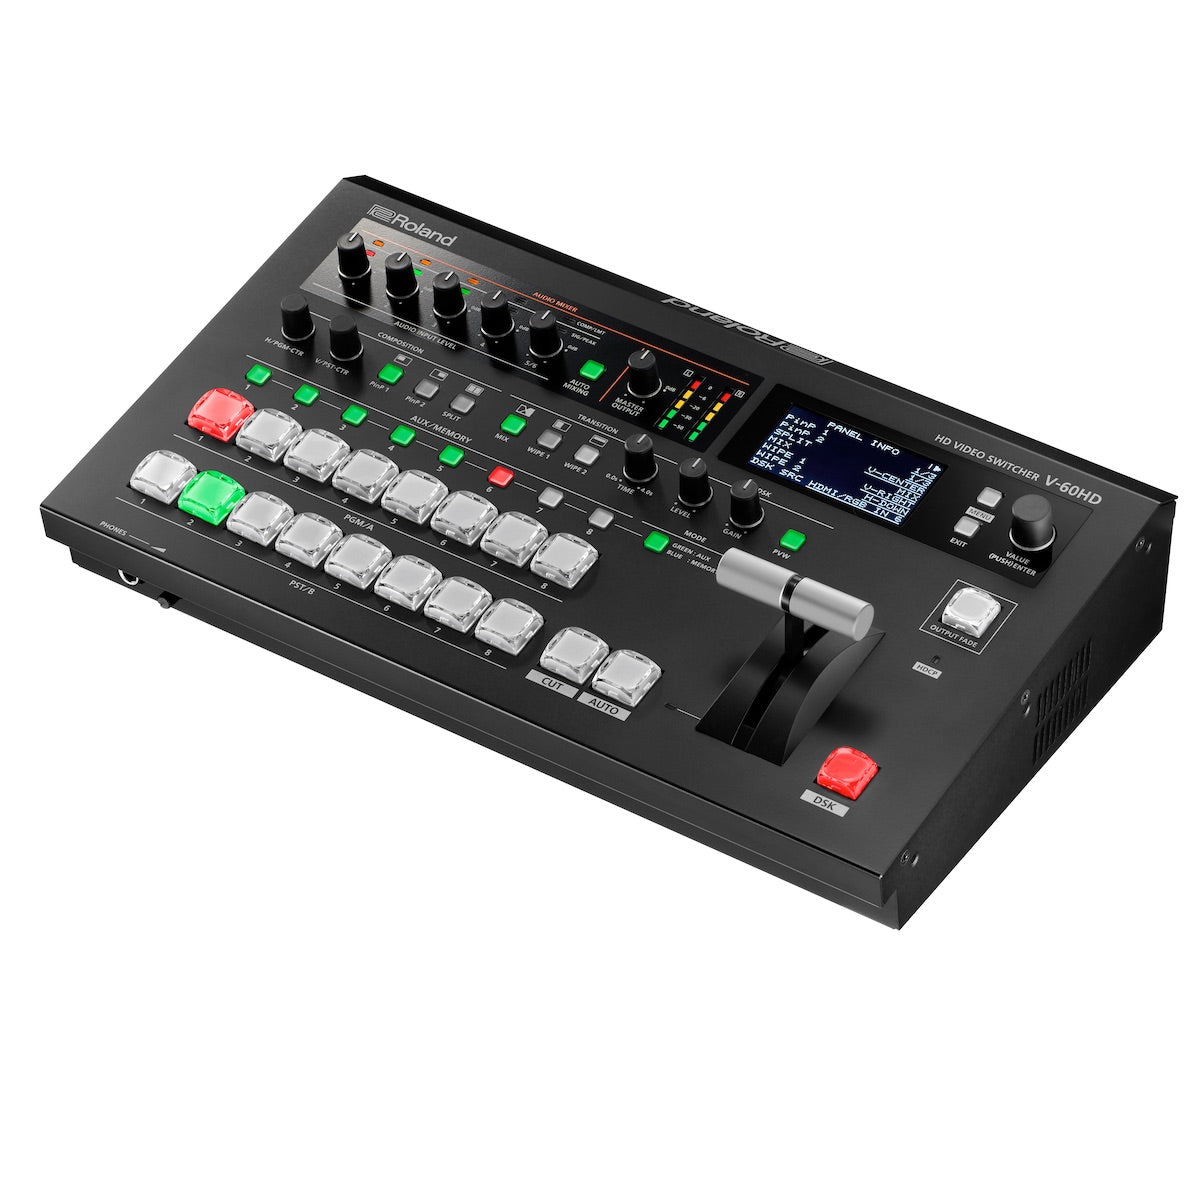 Roland V-60HD - Multi-format HD Video Switcher, right 3/4 view